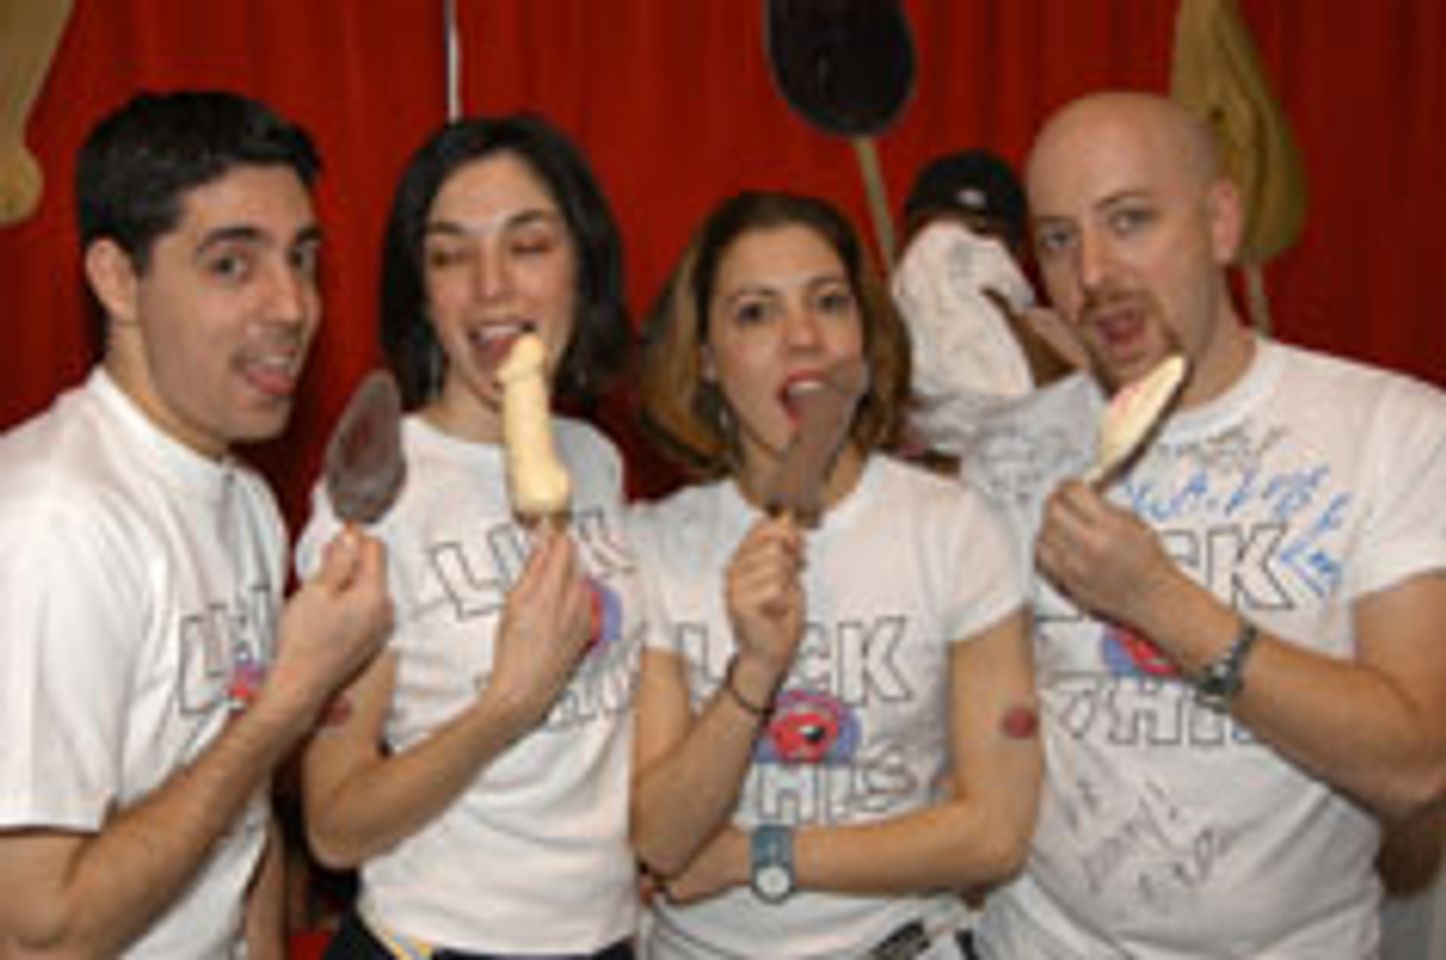 Lots Oh Lixxx Launches Erotic Ice Cream Sales at AEE